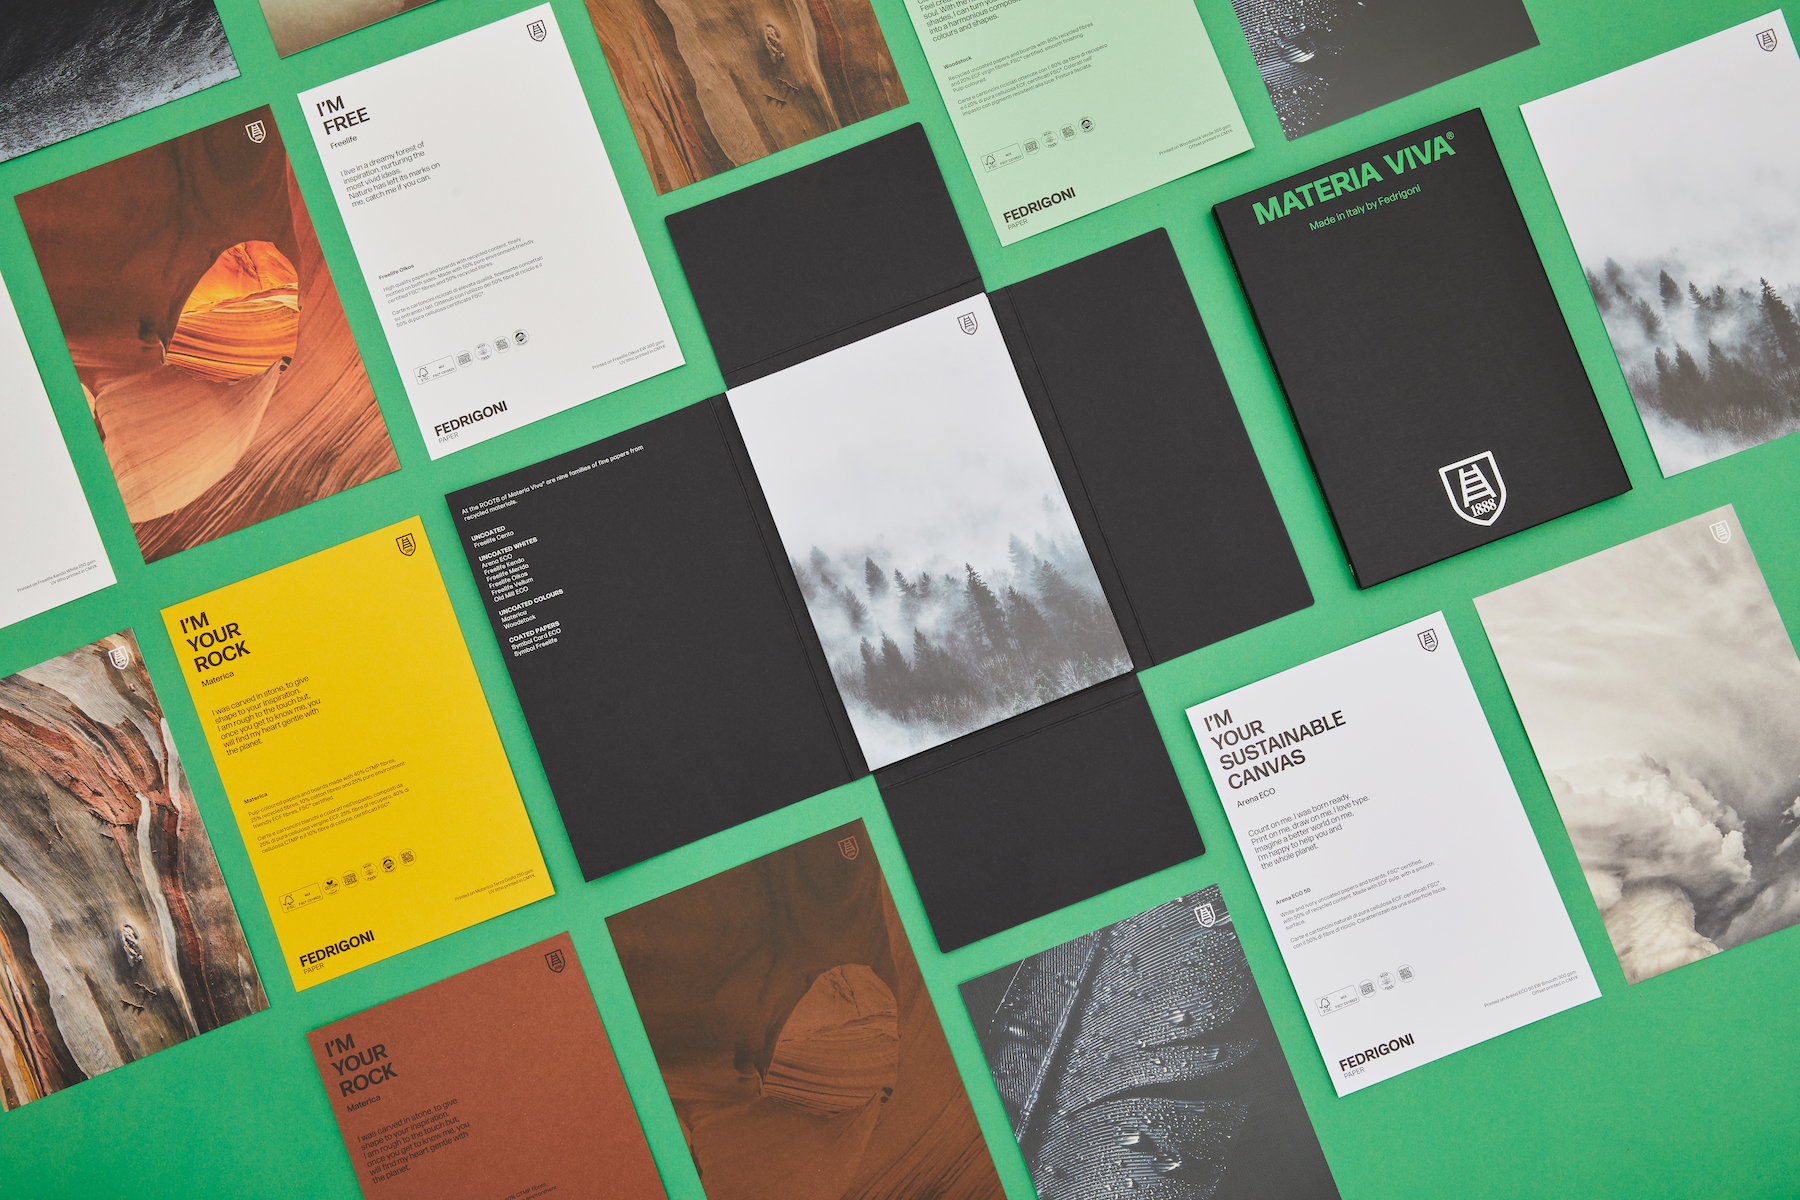 Fedrigoni showcases a multiplicity of printing techniques with its recycled content papers